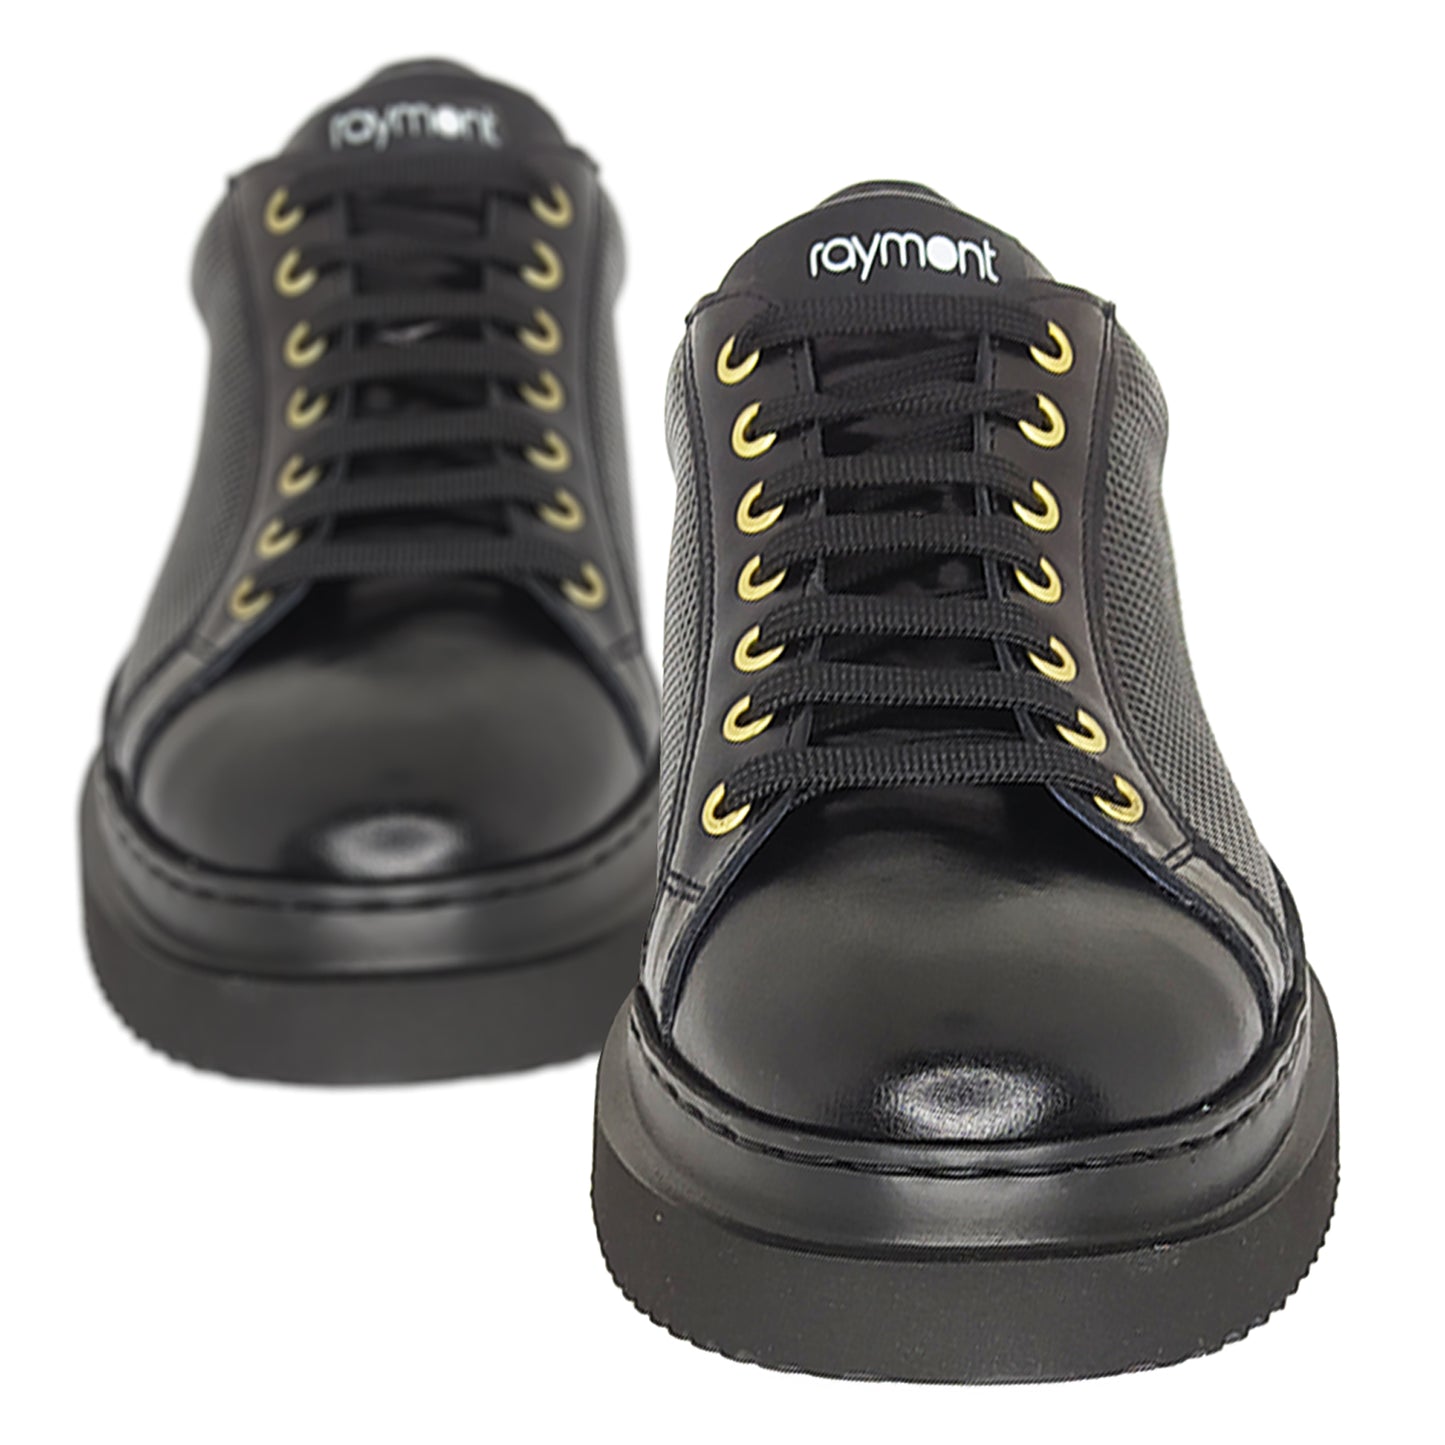 Handmade Leather Sneakers Shoes Black 823 BLACK YW